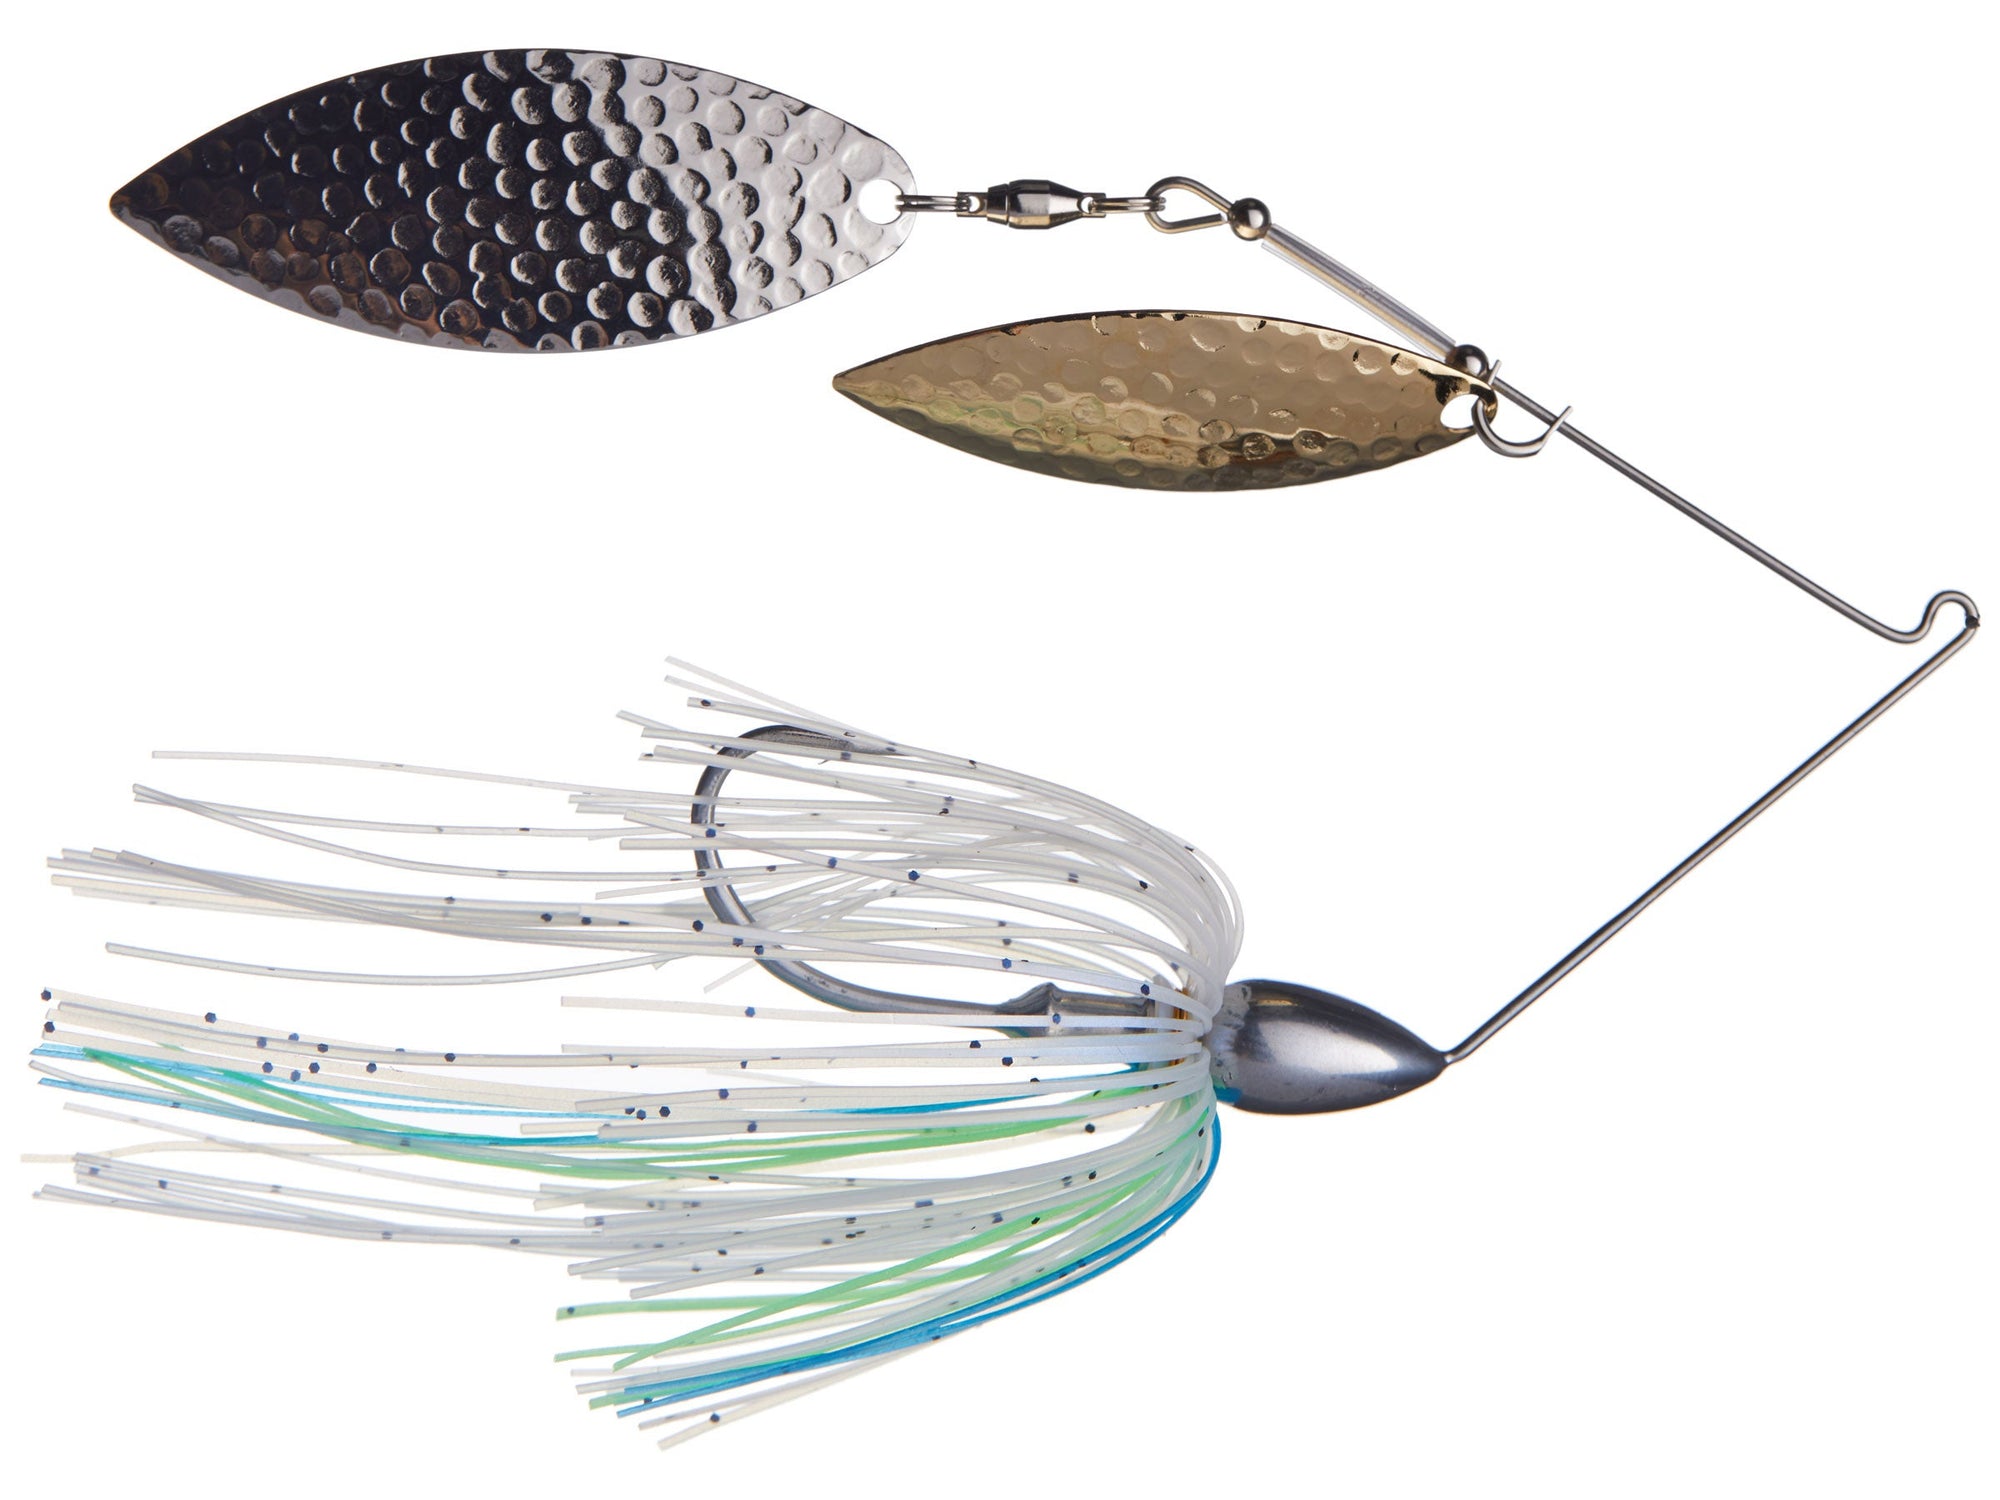 War Eagle Spinner Bait Black And Chartreuse – Hammonds Fishing